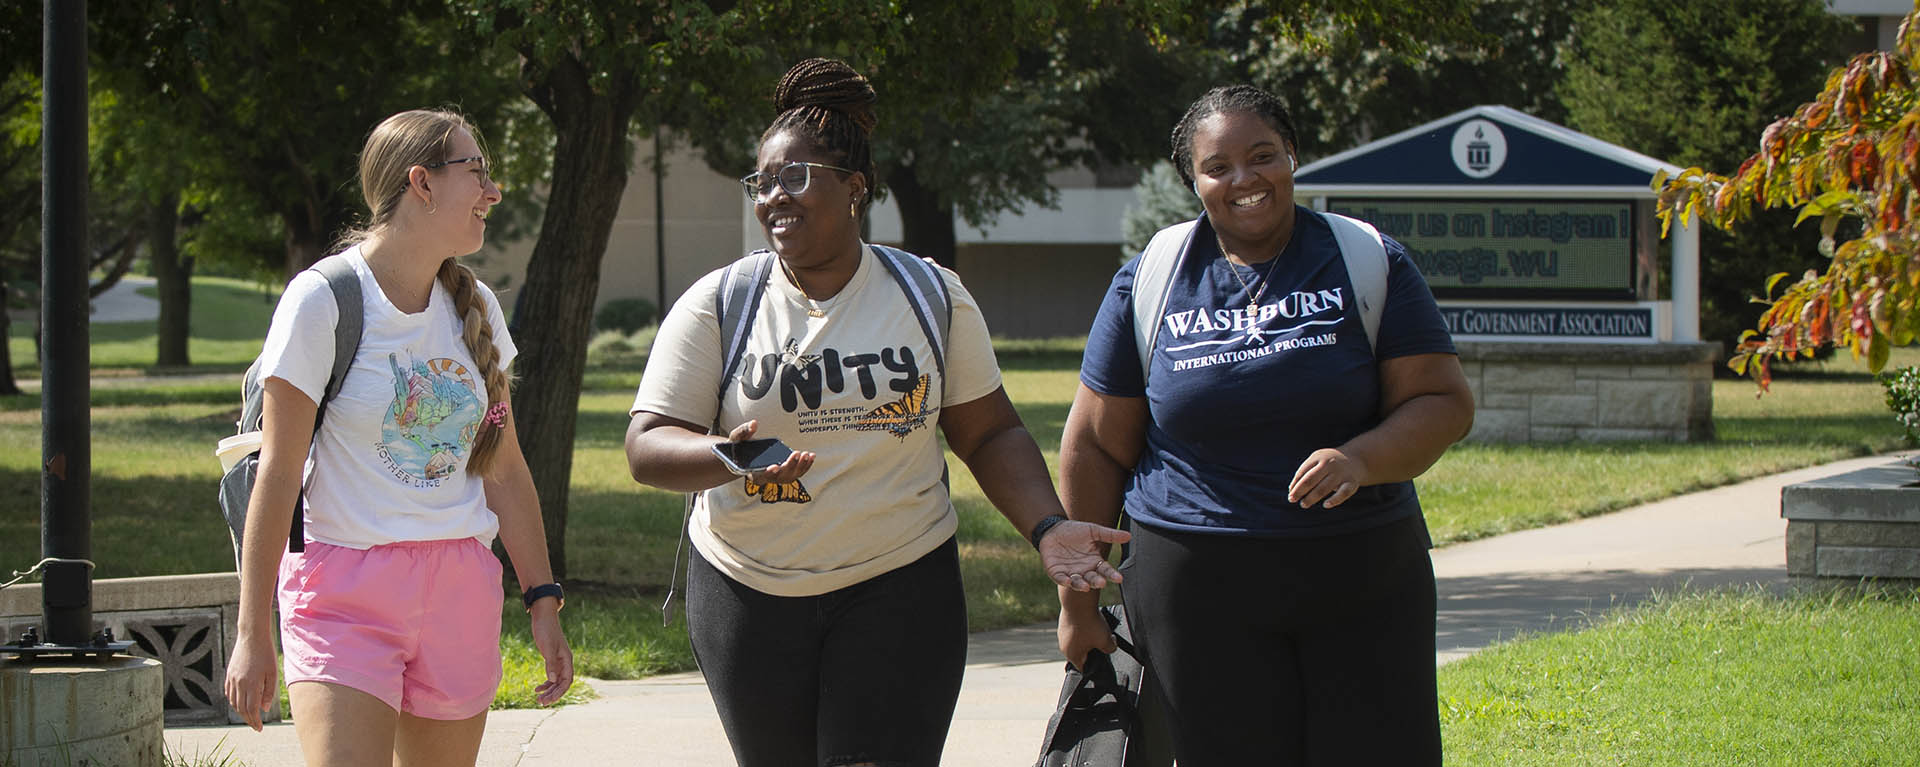 Students laugh while walking to class on campus.